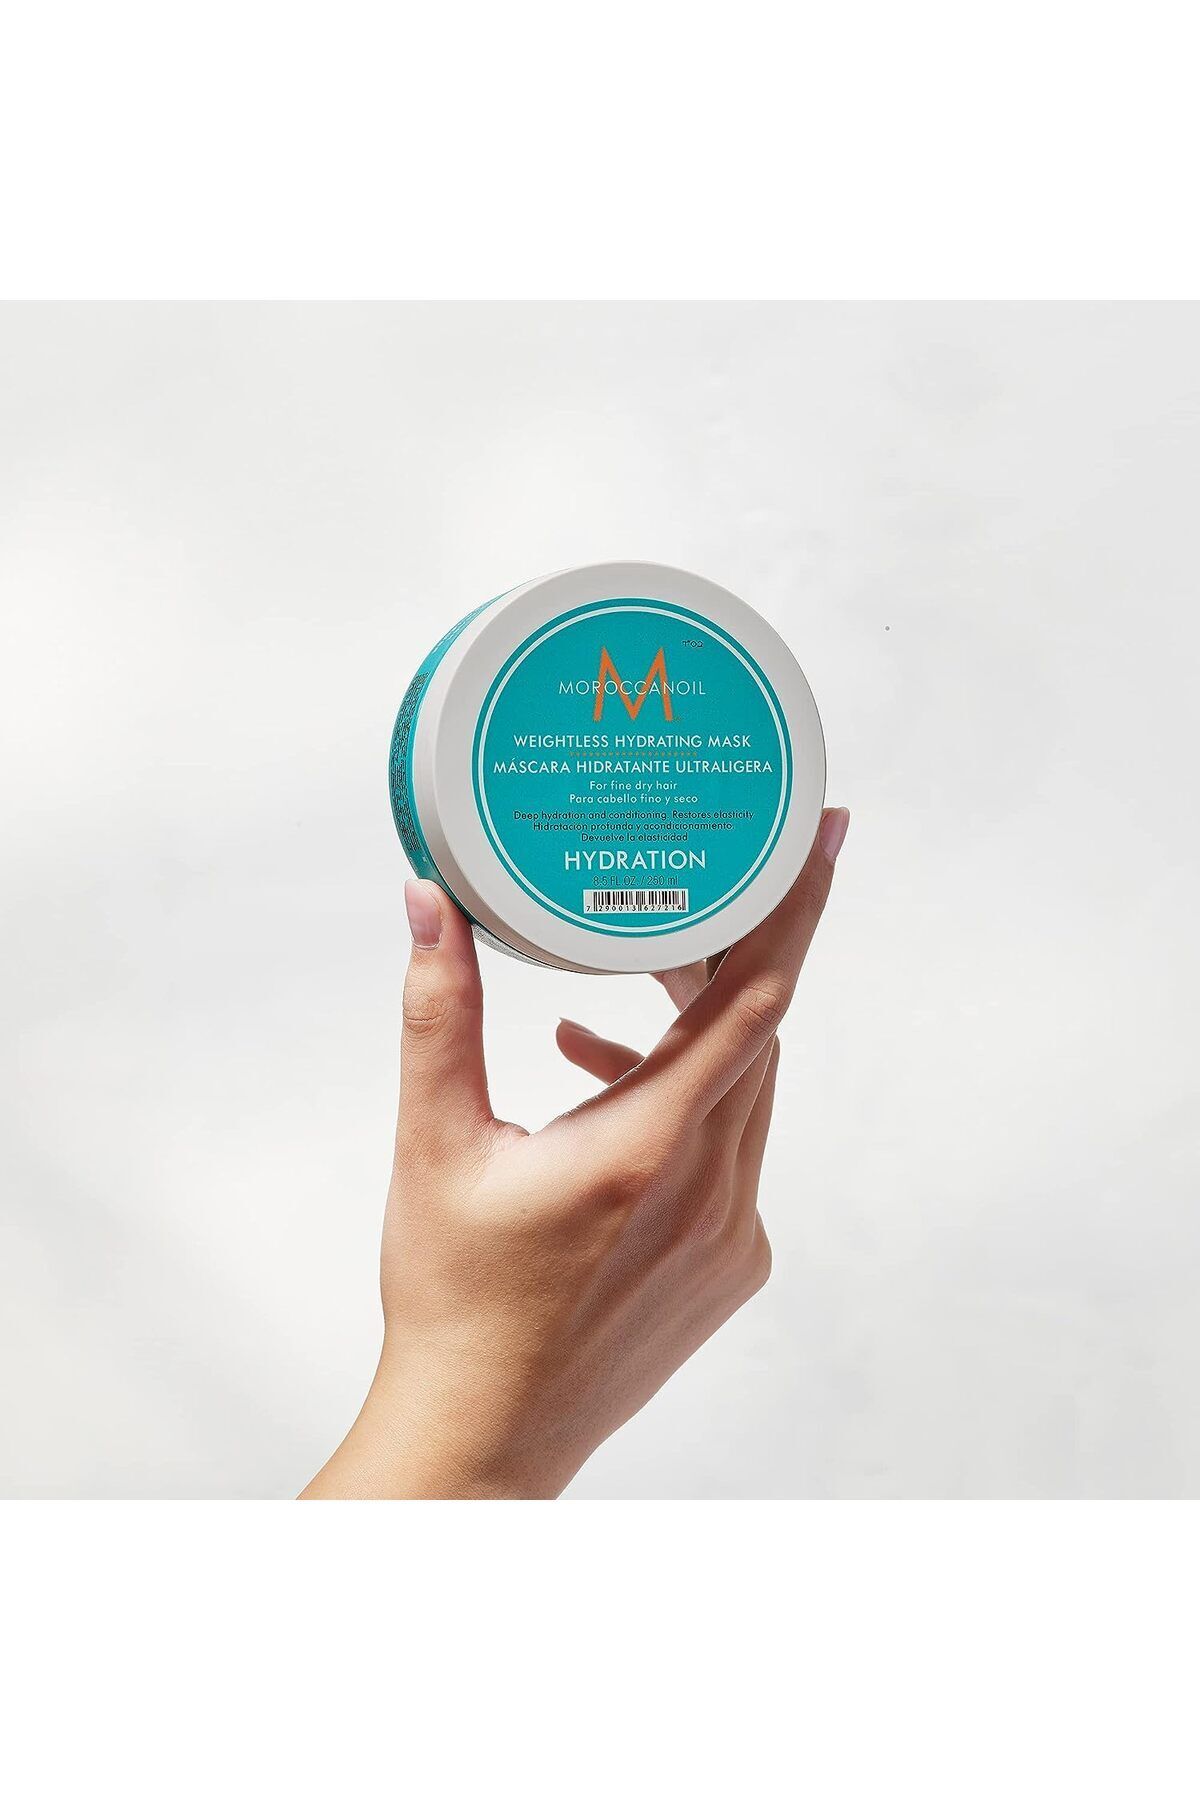 Moroccanoil Weightless Hydrating Mask Deep Care Mask 250ml E Trusty40